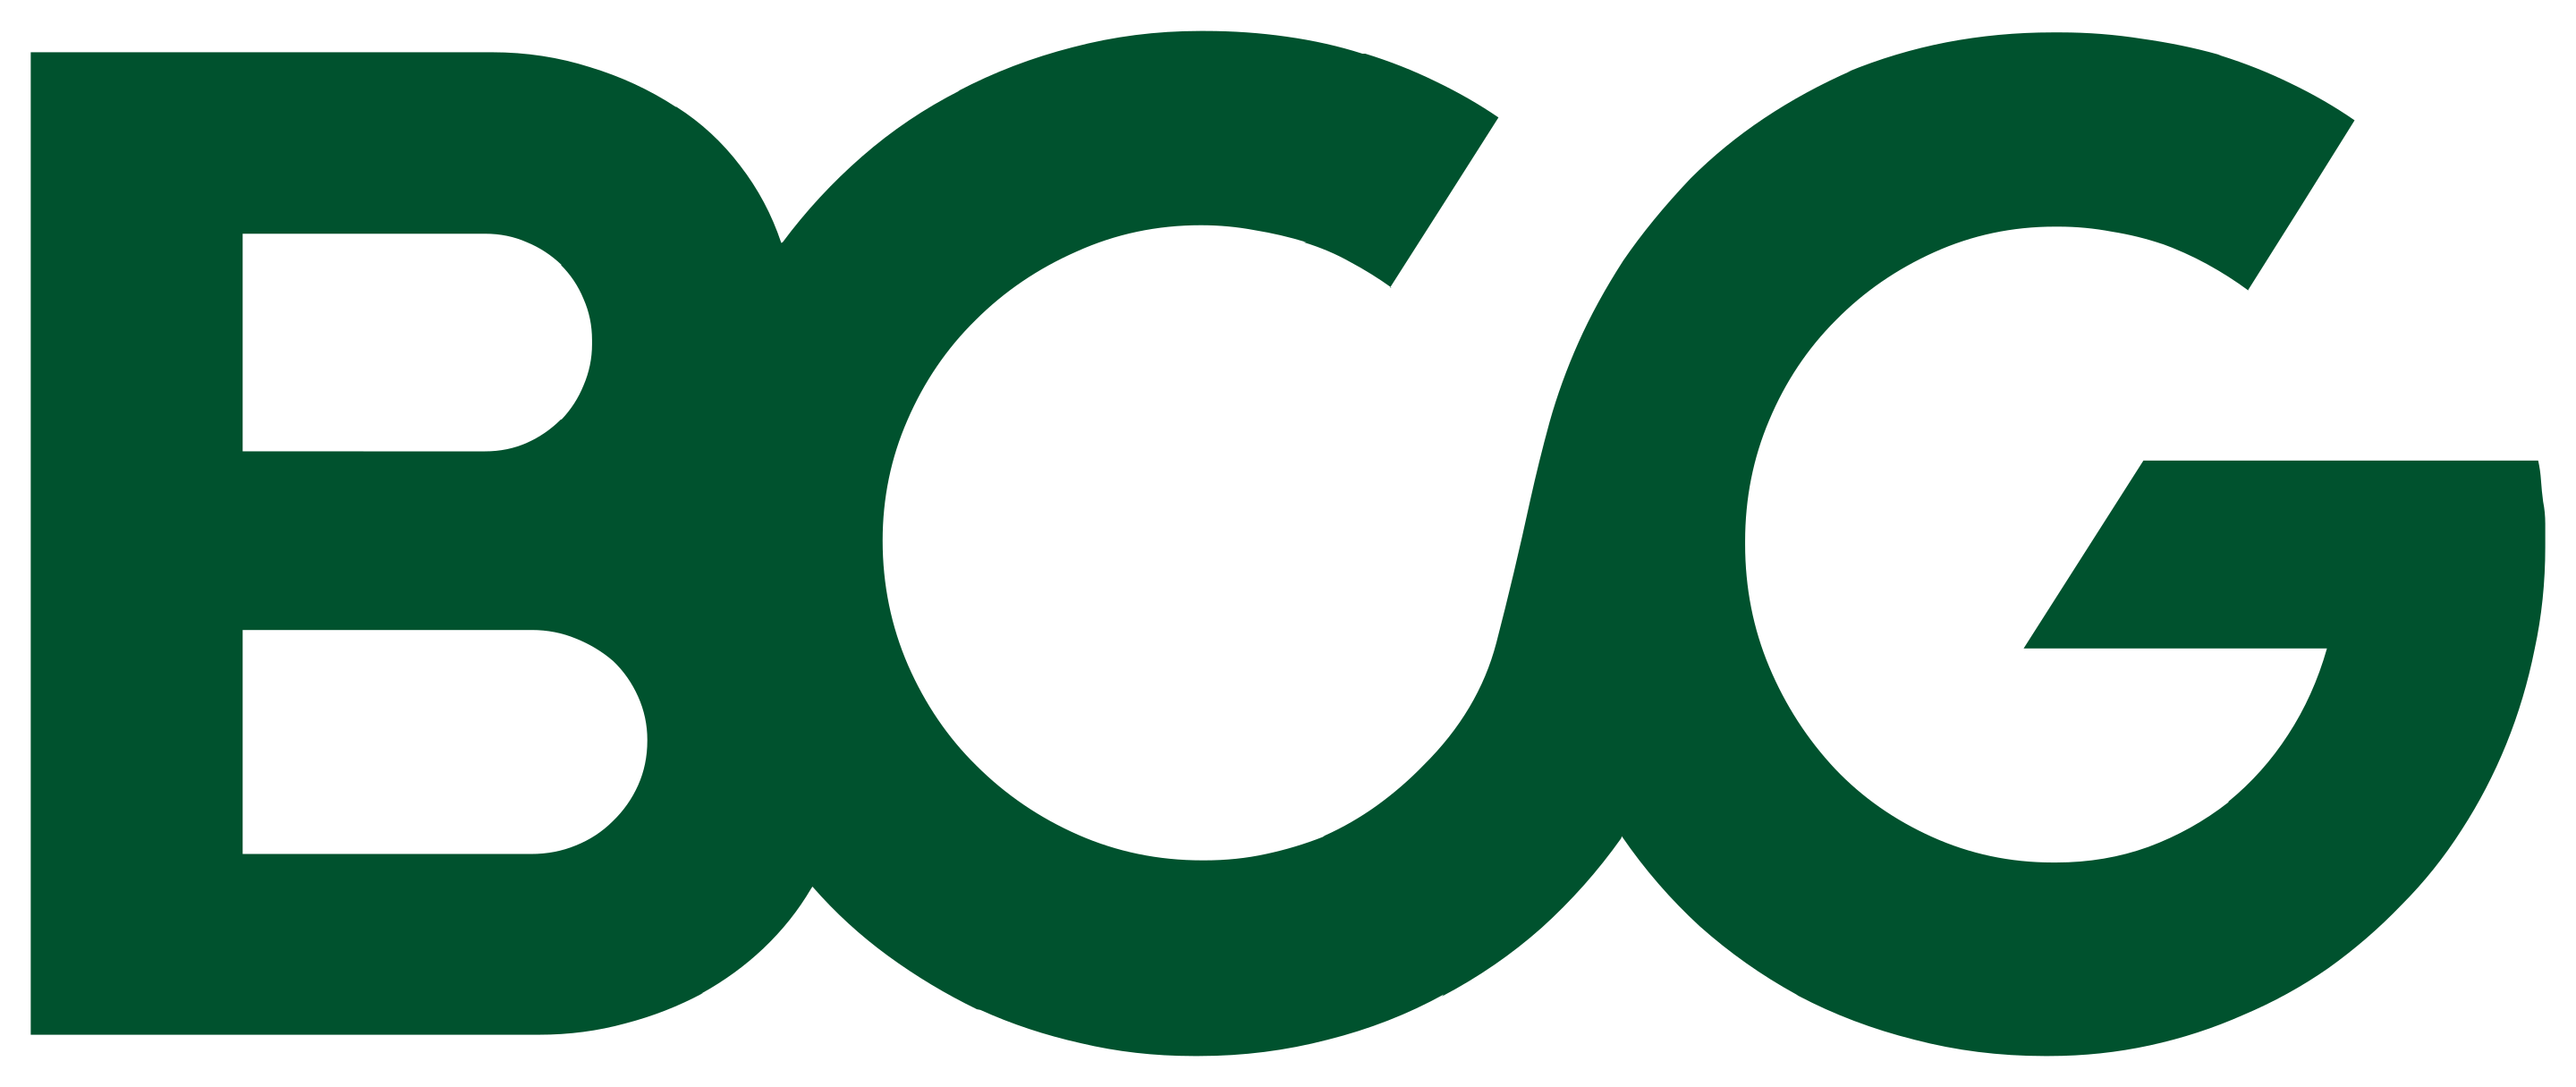 Boston_Consulting_Group_2020_logo.svg